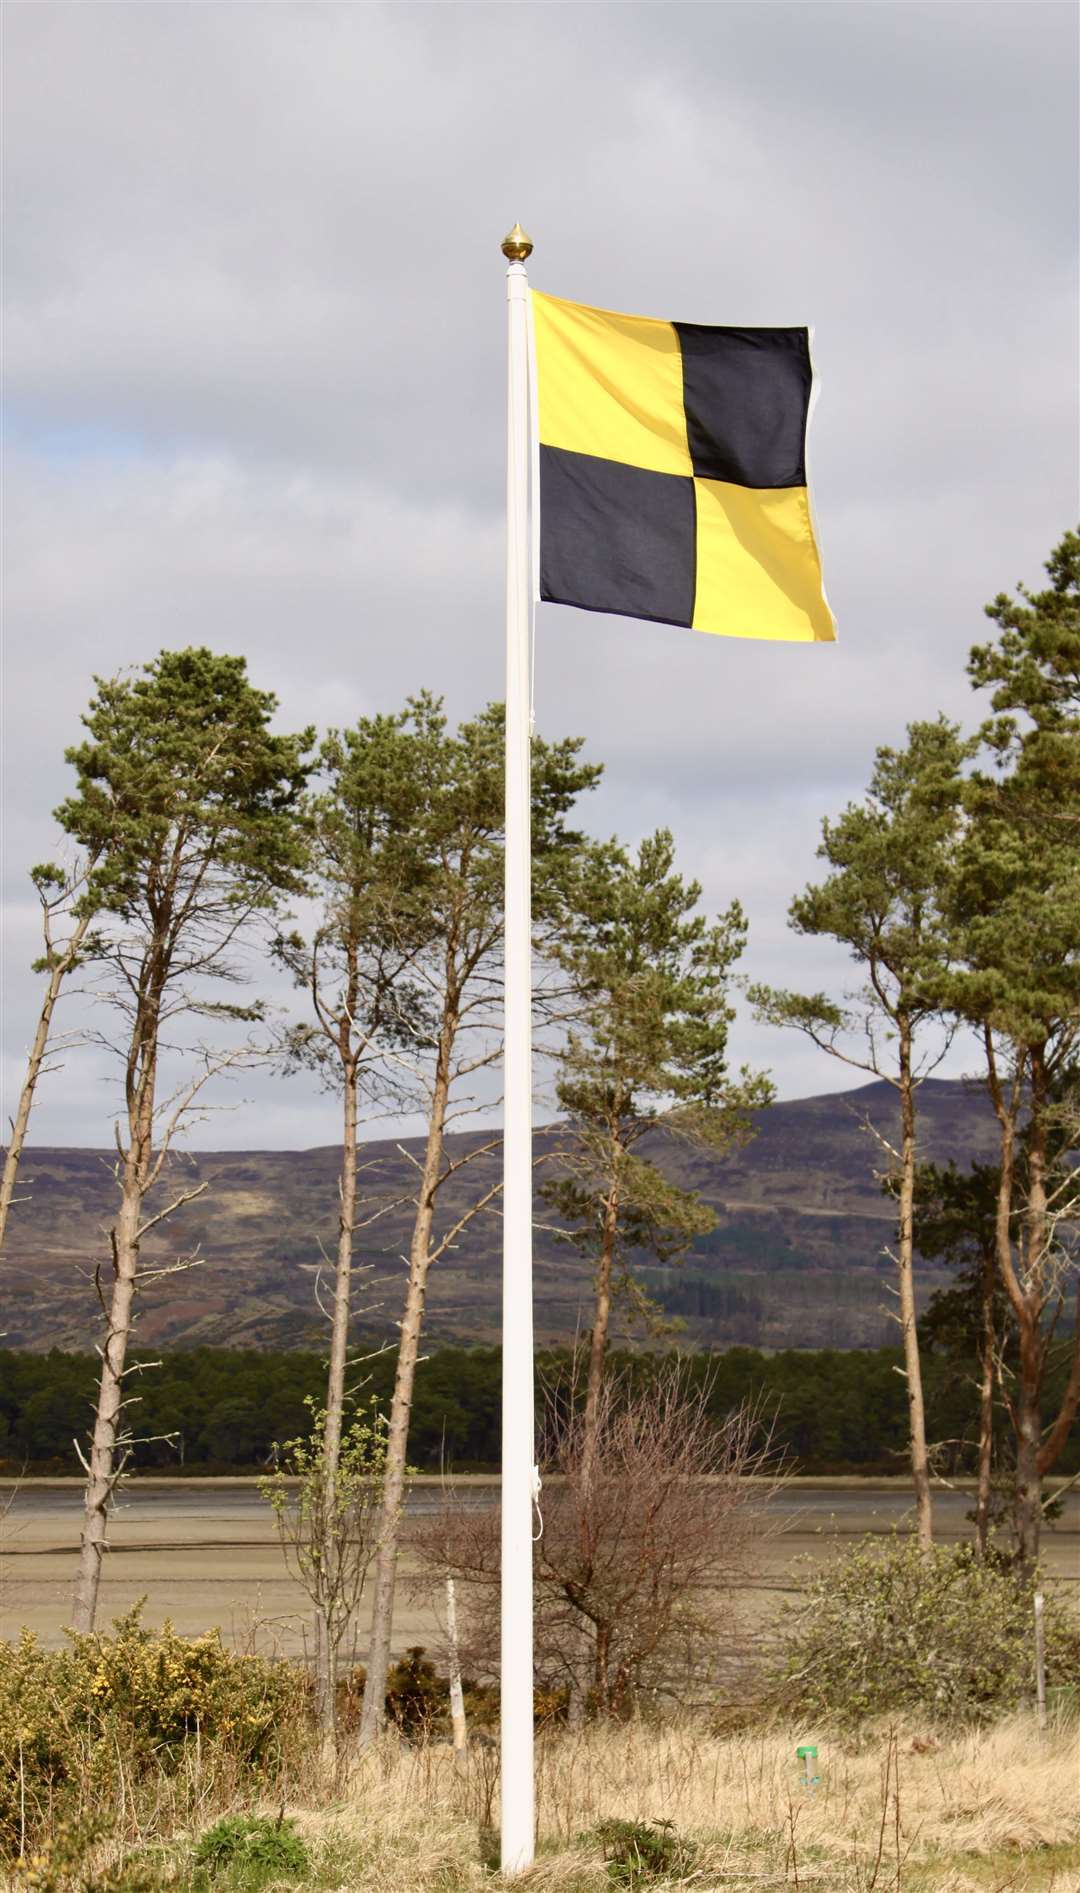 The Yellow Jack is flying at Loch Fleet.